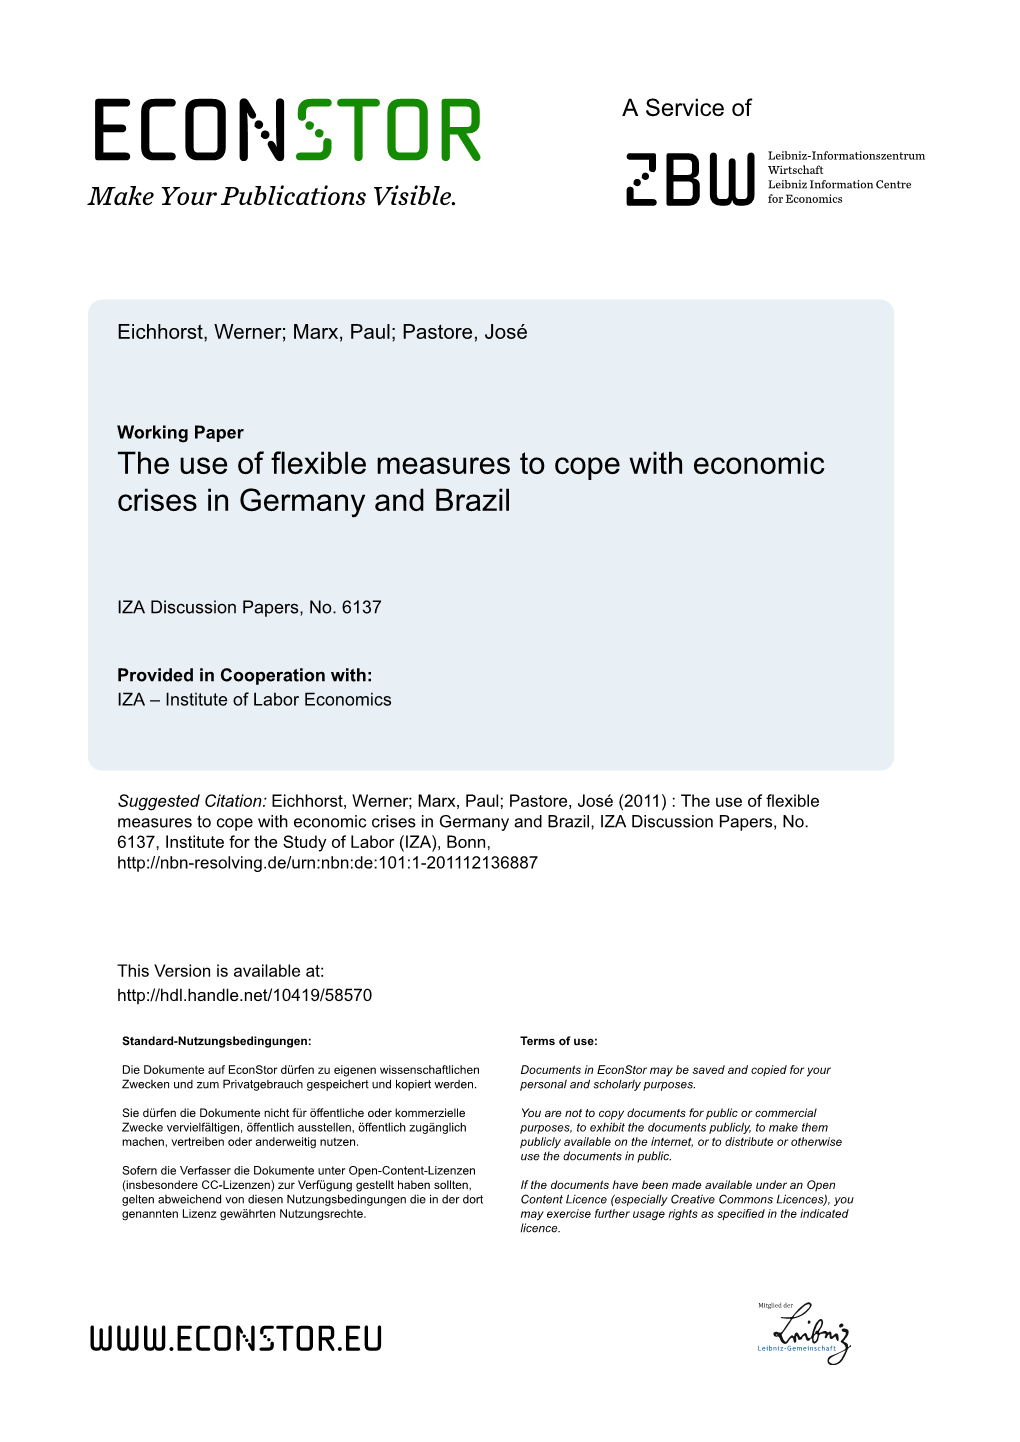 The Use of Flexible Measures to Cope with Economic Crises in Germany and Brazil